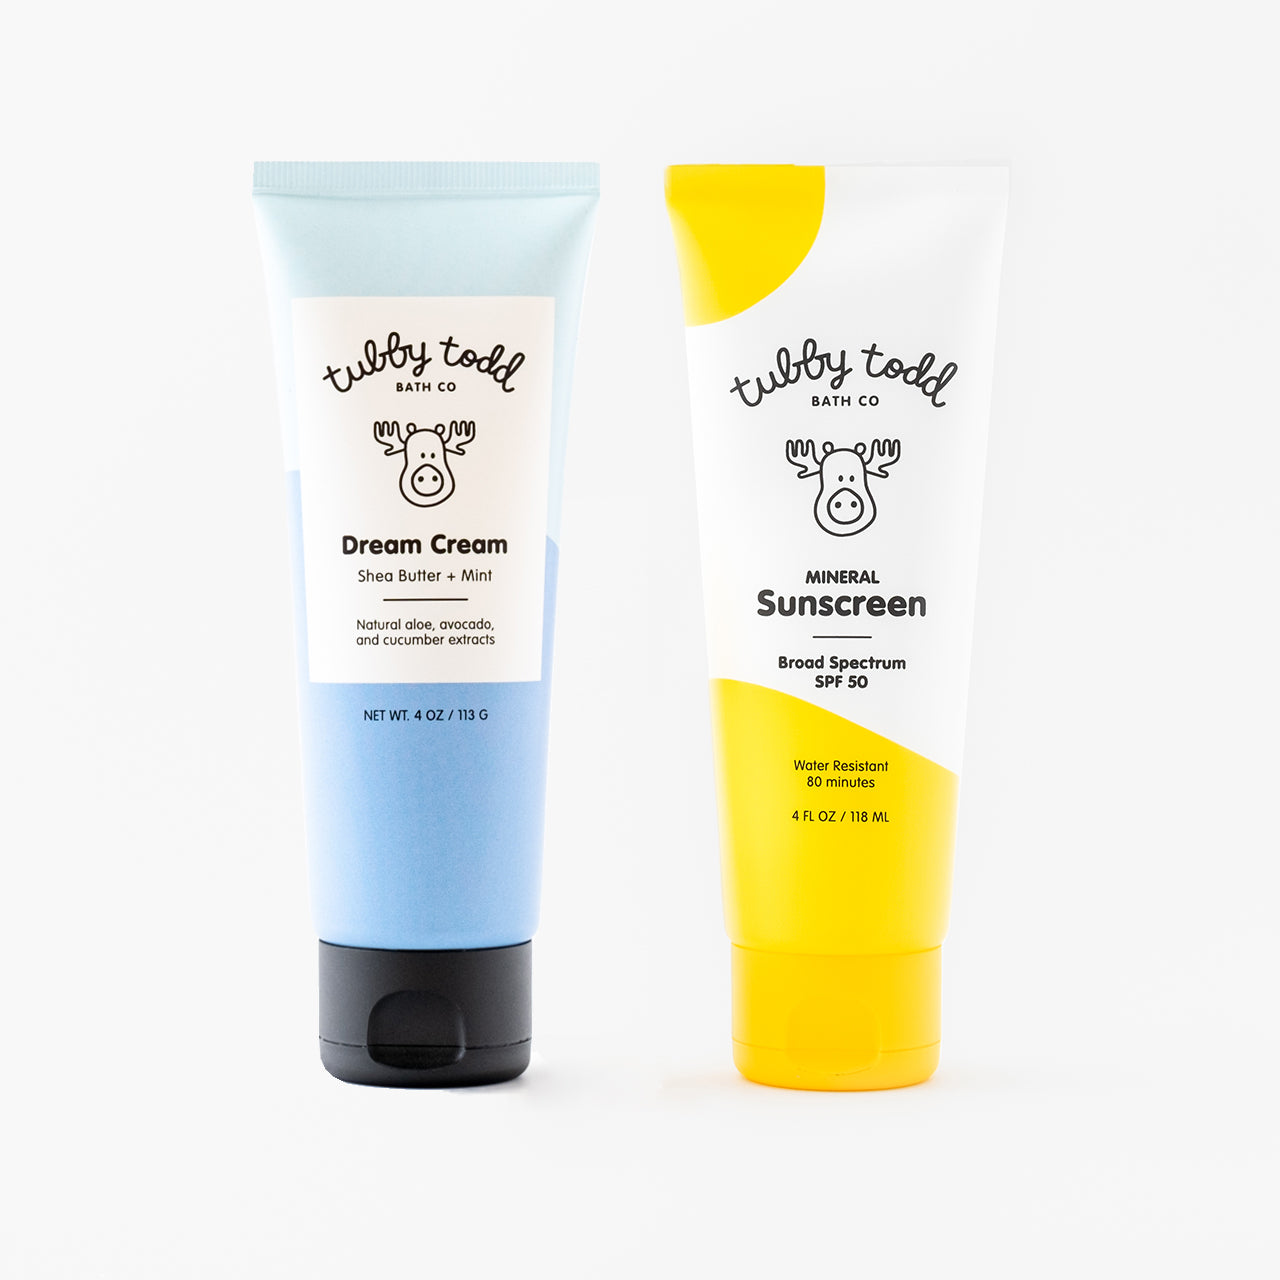 Mineral Sunscreen next to Dream Cream on white background